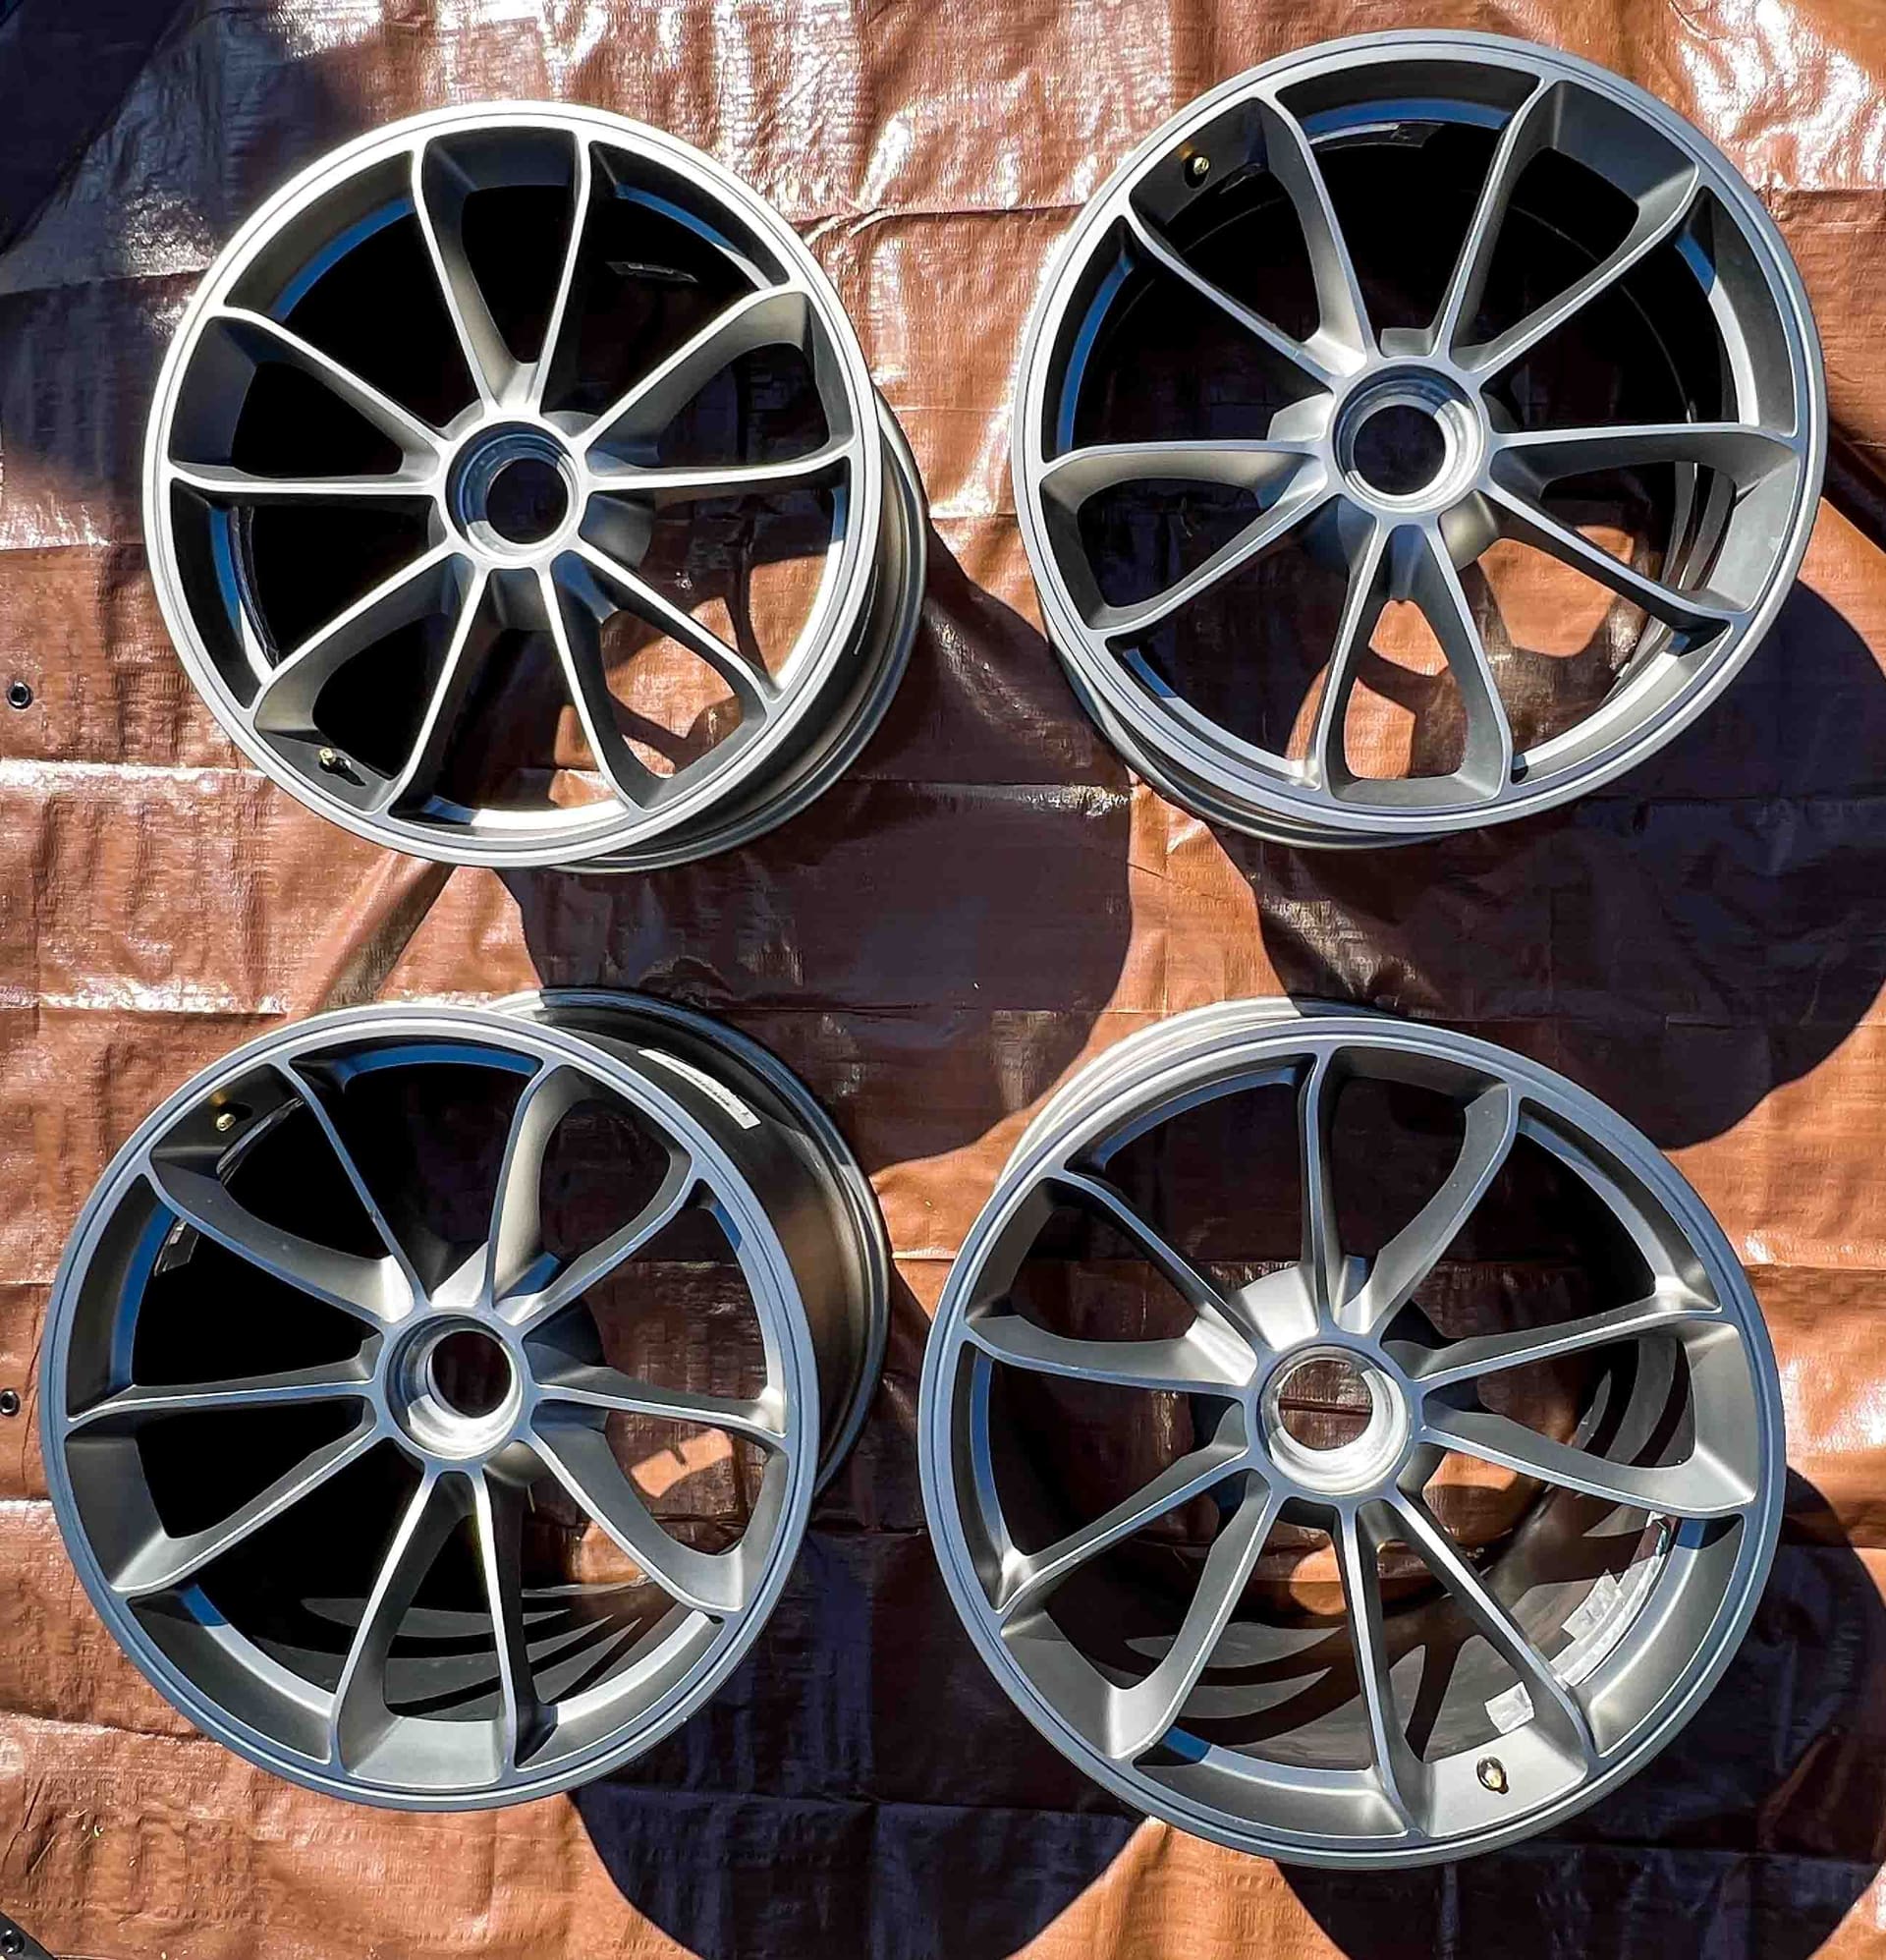 Wheels and Tires/Axles - Factory 991.2 GT3 Wheels - Excellent Condition - Used - 2016 to 2019 Porsche GT3 - Scottsdale, AZ 85255, United States